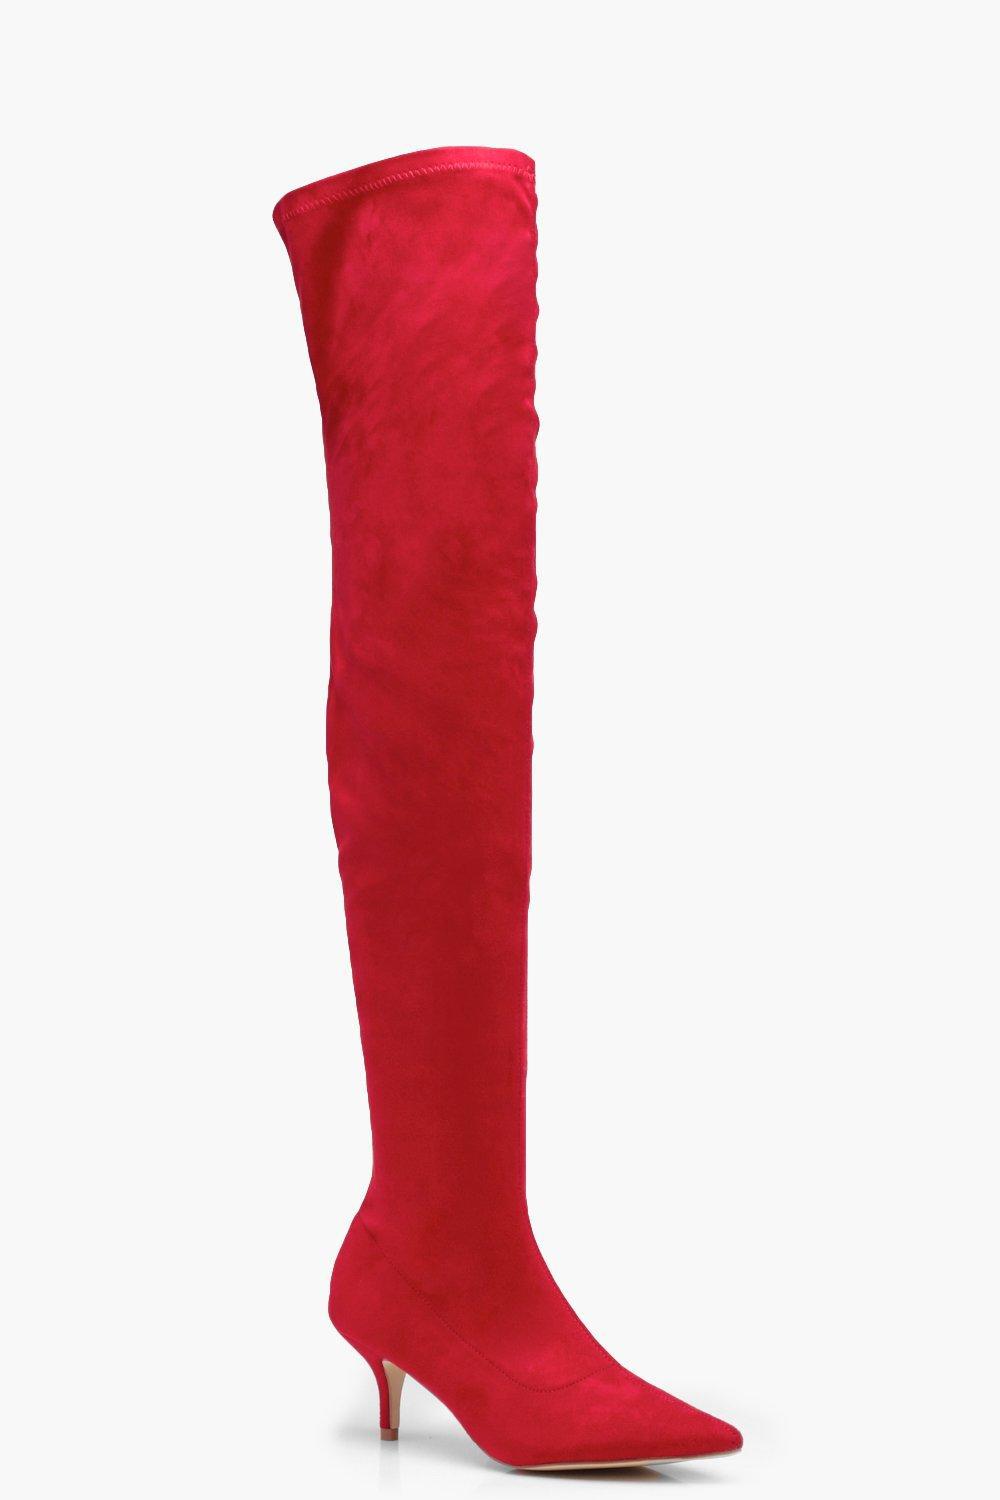 Details about   Women Pu Leather Club Kitten Heel Pointy Toe Pull On Overknee Thigh High Boots L 